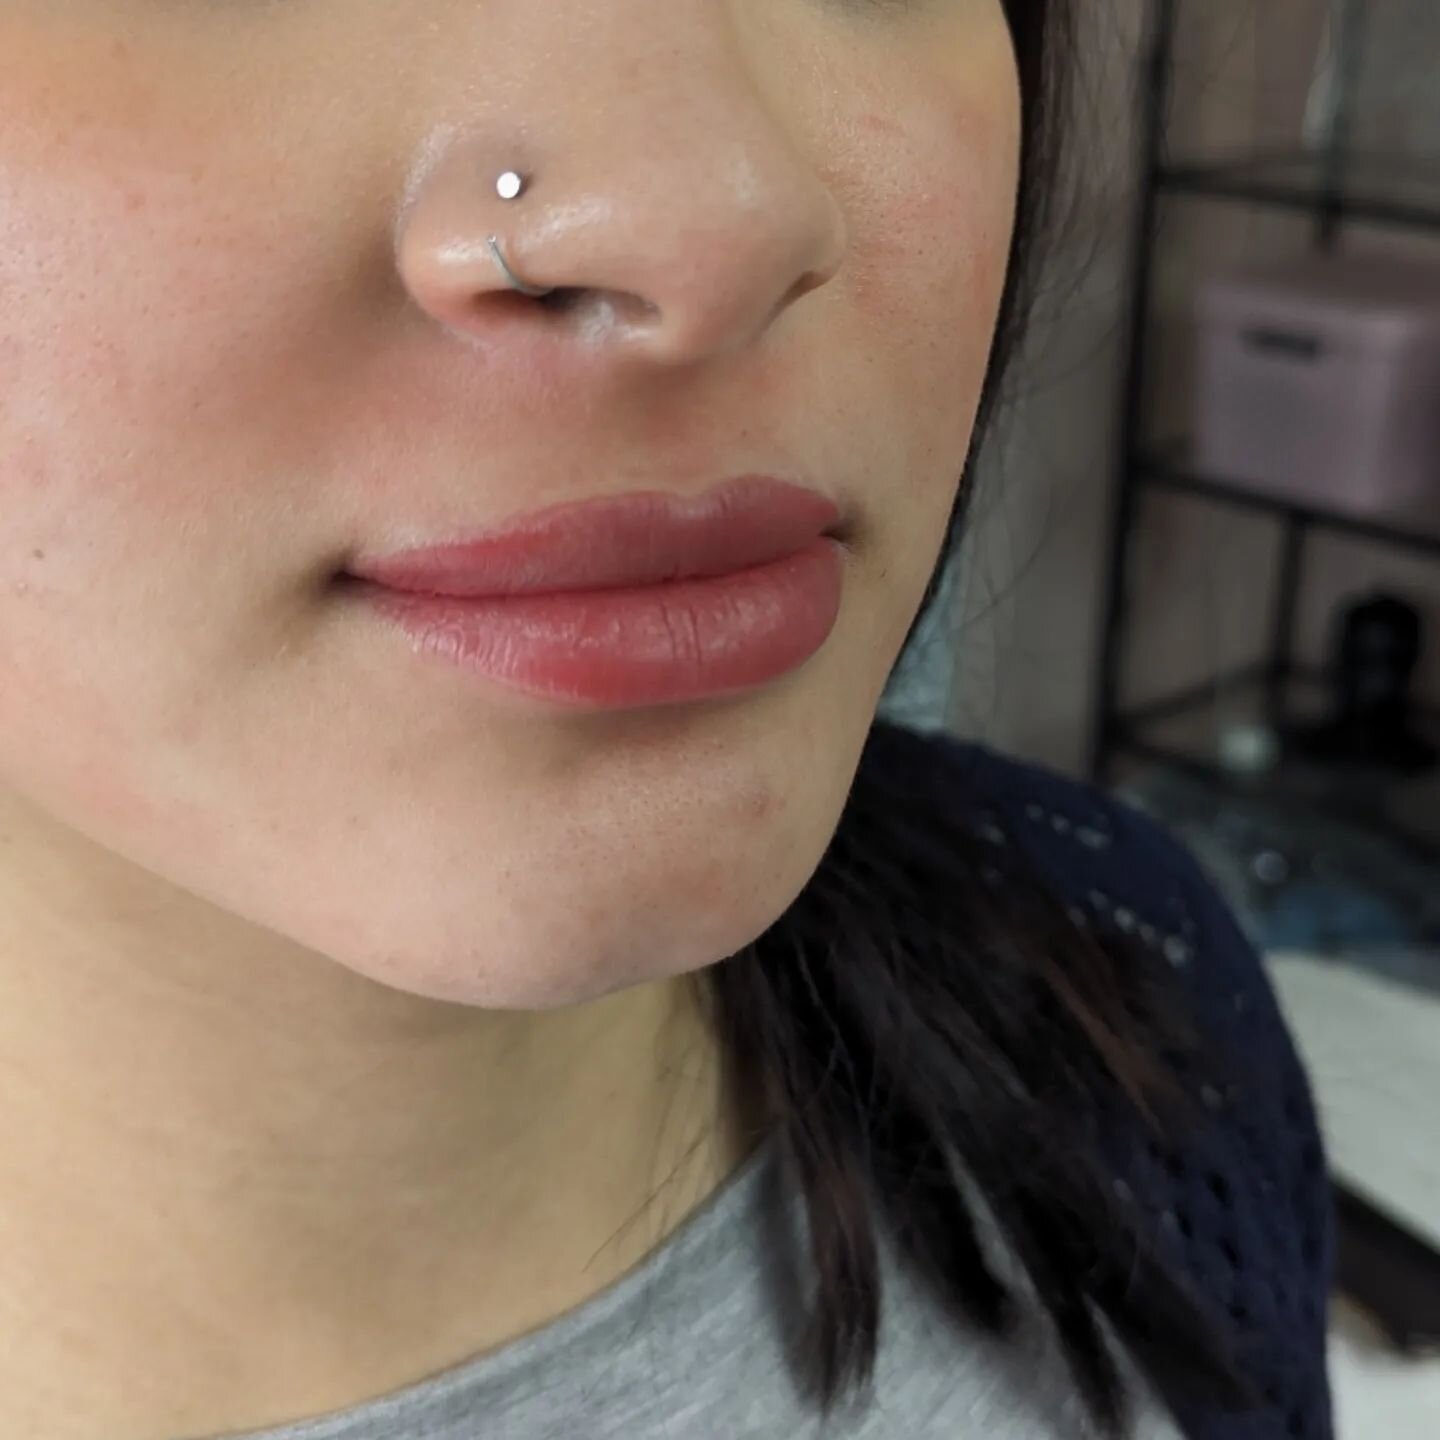 This client of mine wanted a natural lip color! We used soft pinks with a little bit of warmth to even out this light hyperpigmentation in her upper lip! Lip blushing is totally customizable to fit all desired outcomes. Whether it is just a little bi